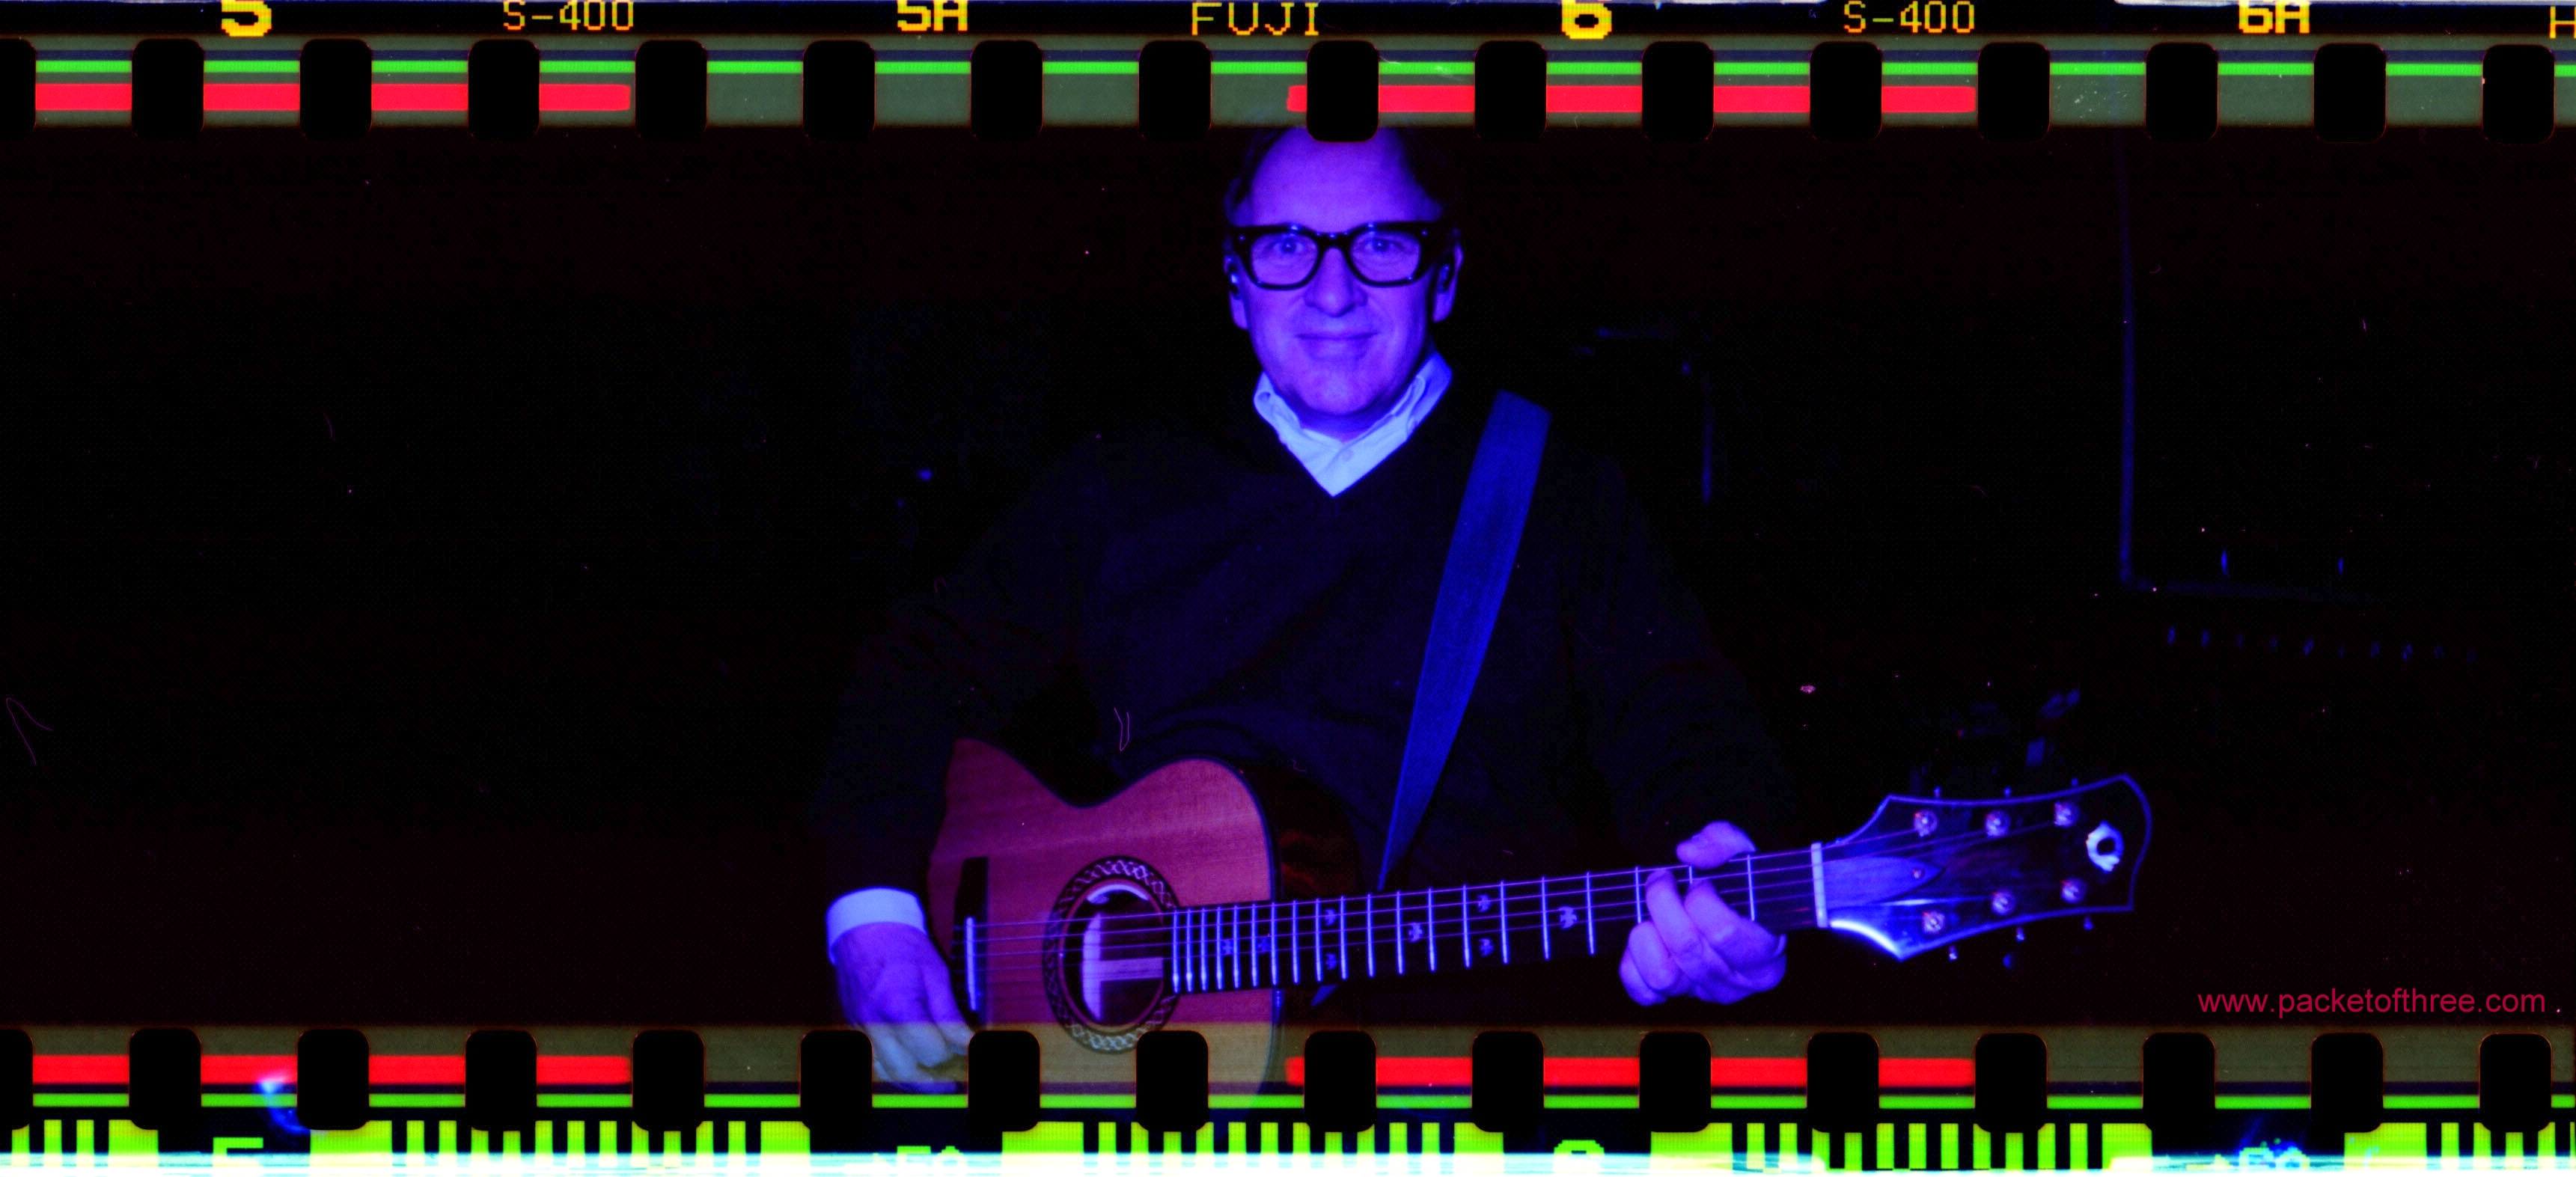 Squeeze - 17 November 2012 - live at The Corn Exchange, Cambridge - Chris Difford